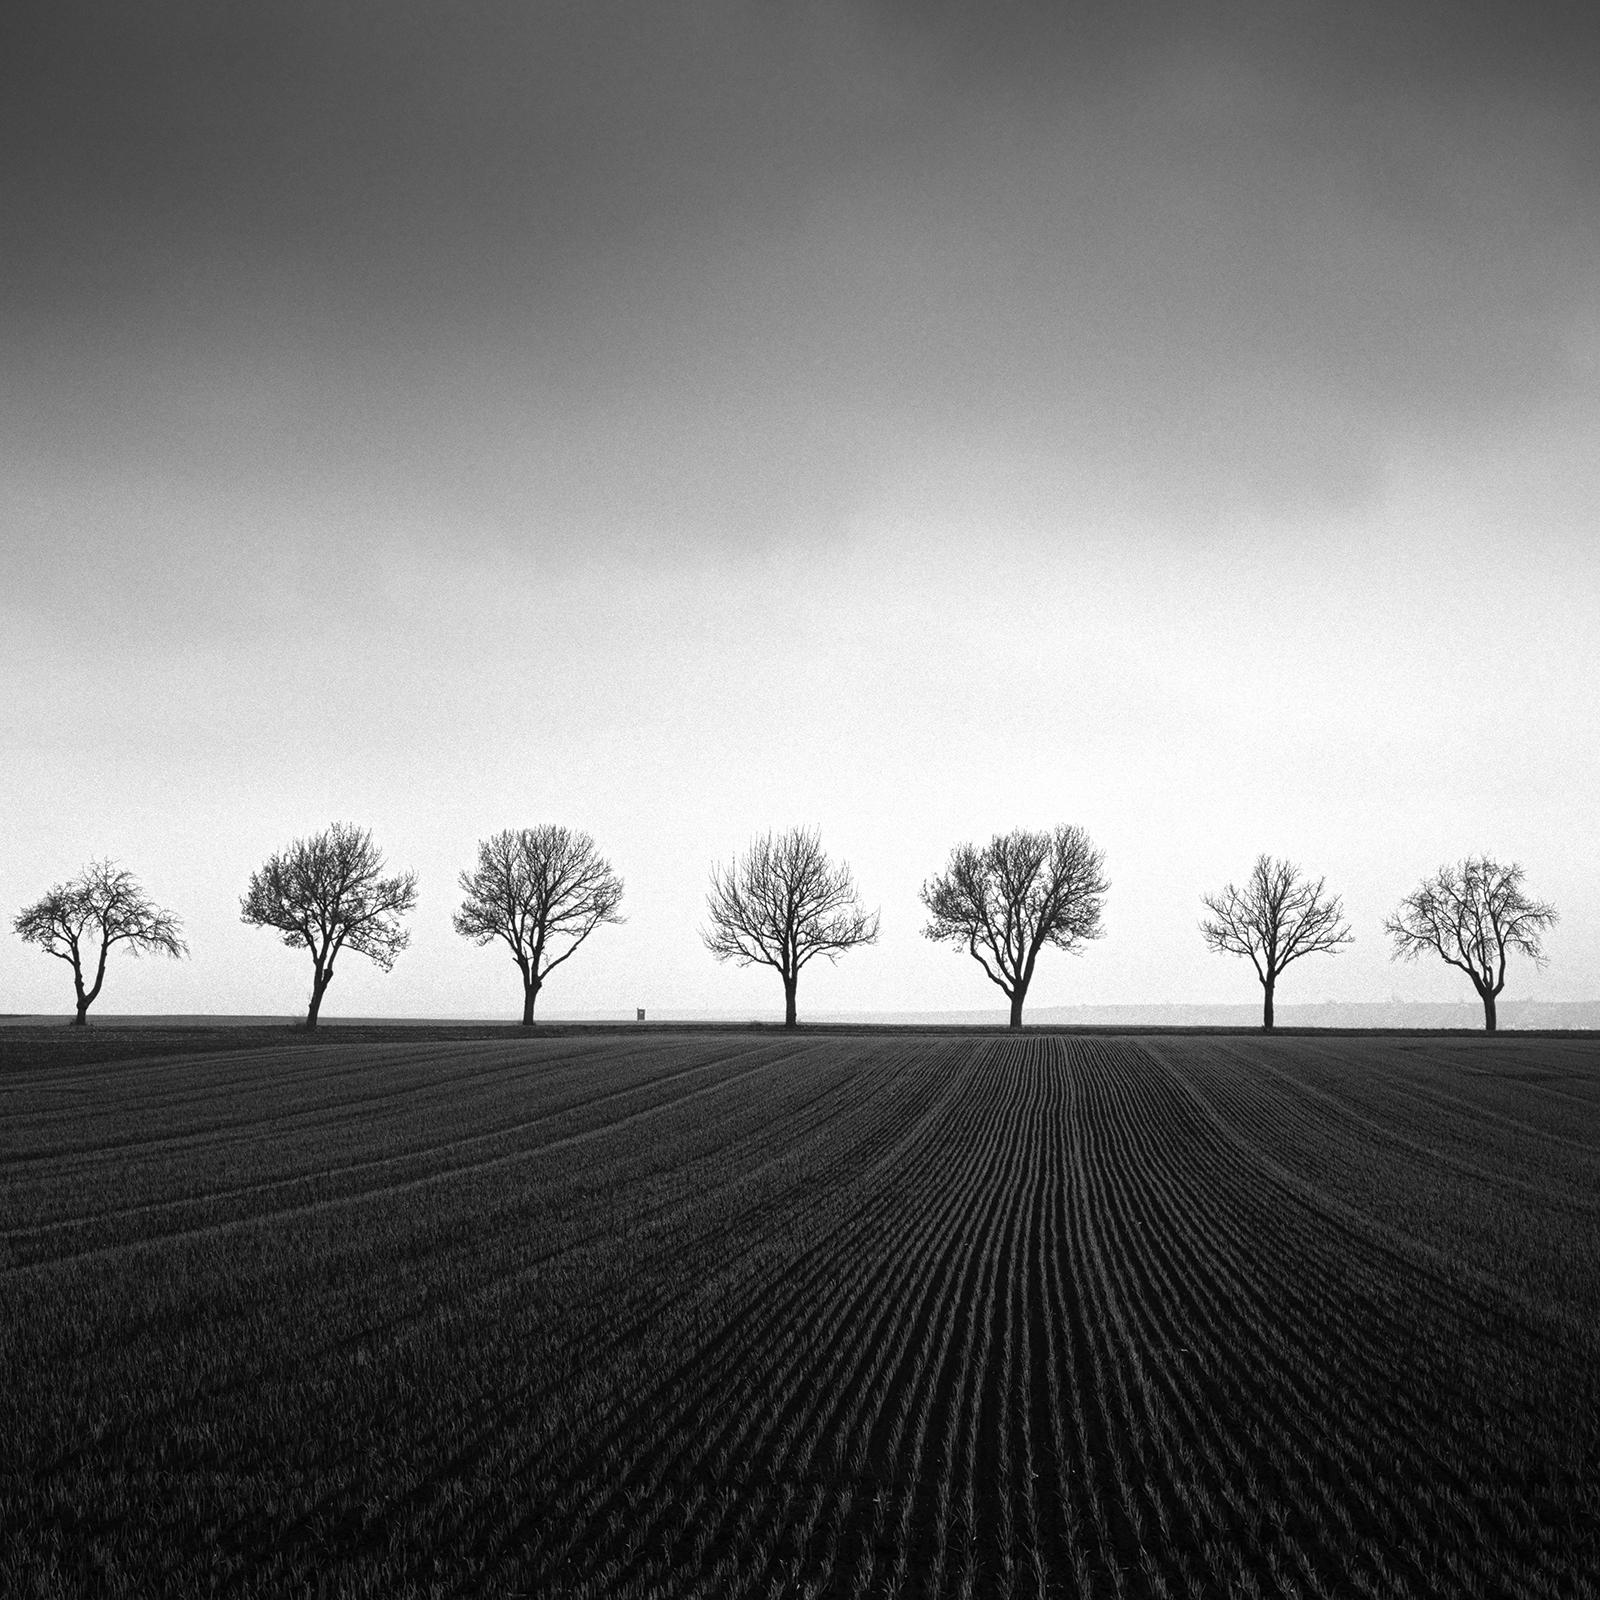 Fourteen Cherry Trees, Cornfield, black and white photography, art, landscape For Sale 4